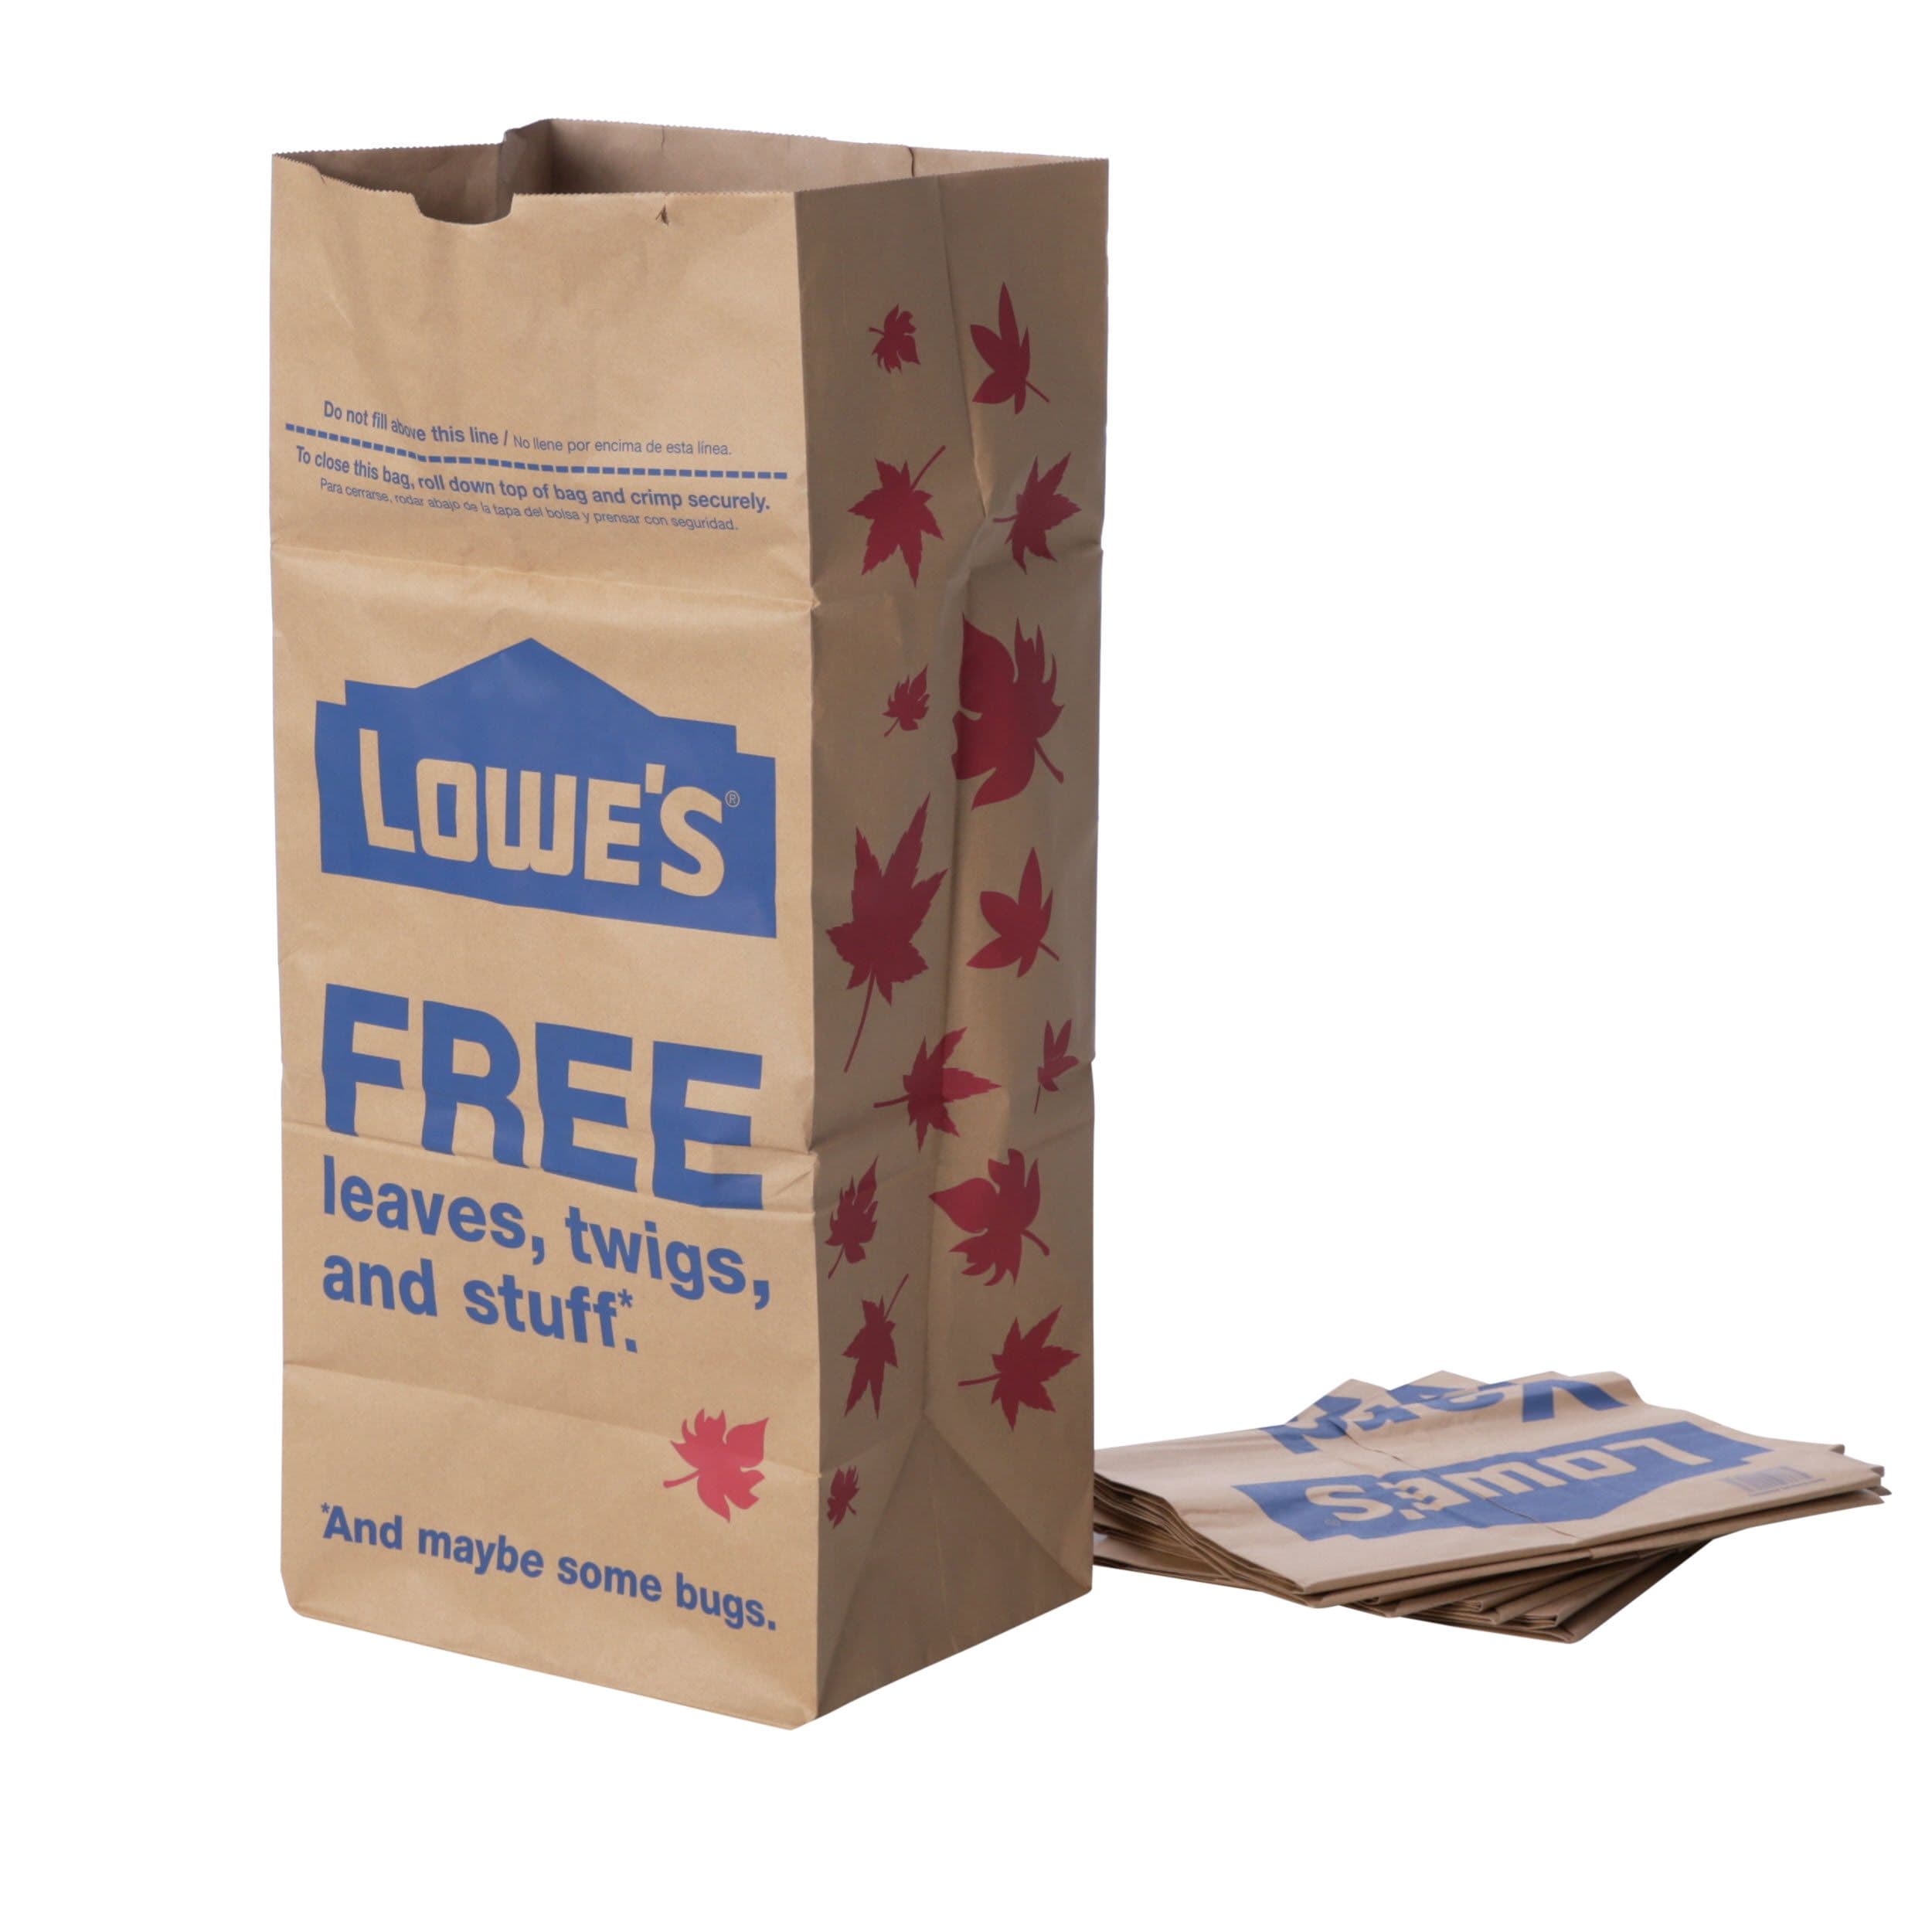 Lowes 30 Gallon Heavy Duty Brown Paper Lawn and Refuse Bags for Home and Garden .limited edition 10 Count 